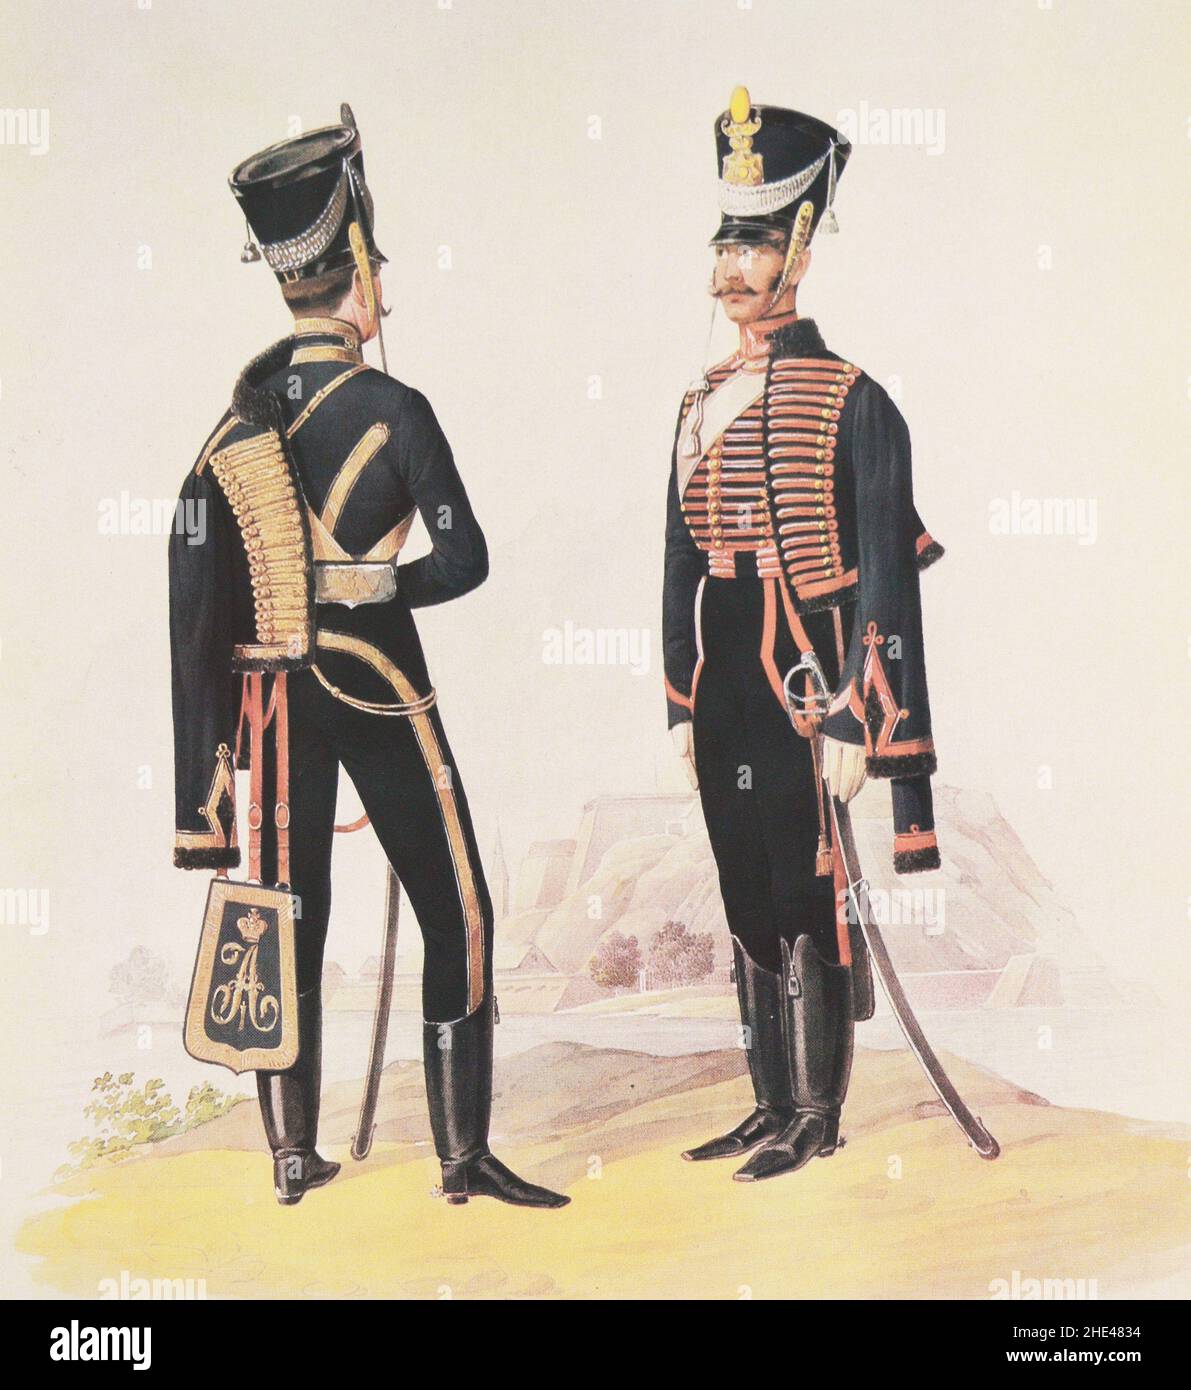 Officer and private of the Elisavetgrad hussar regiment of the Russian Empire in 1825. Stock Photo